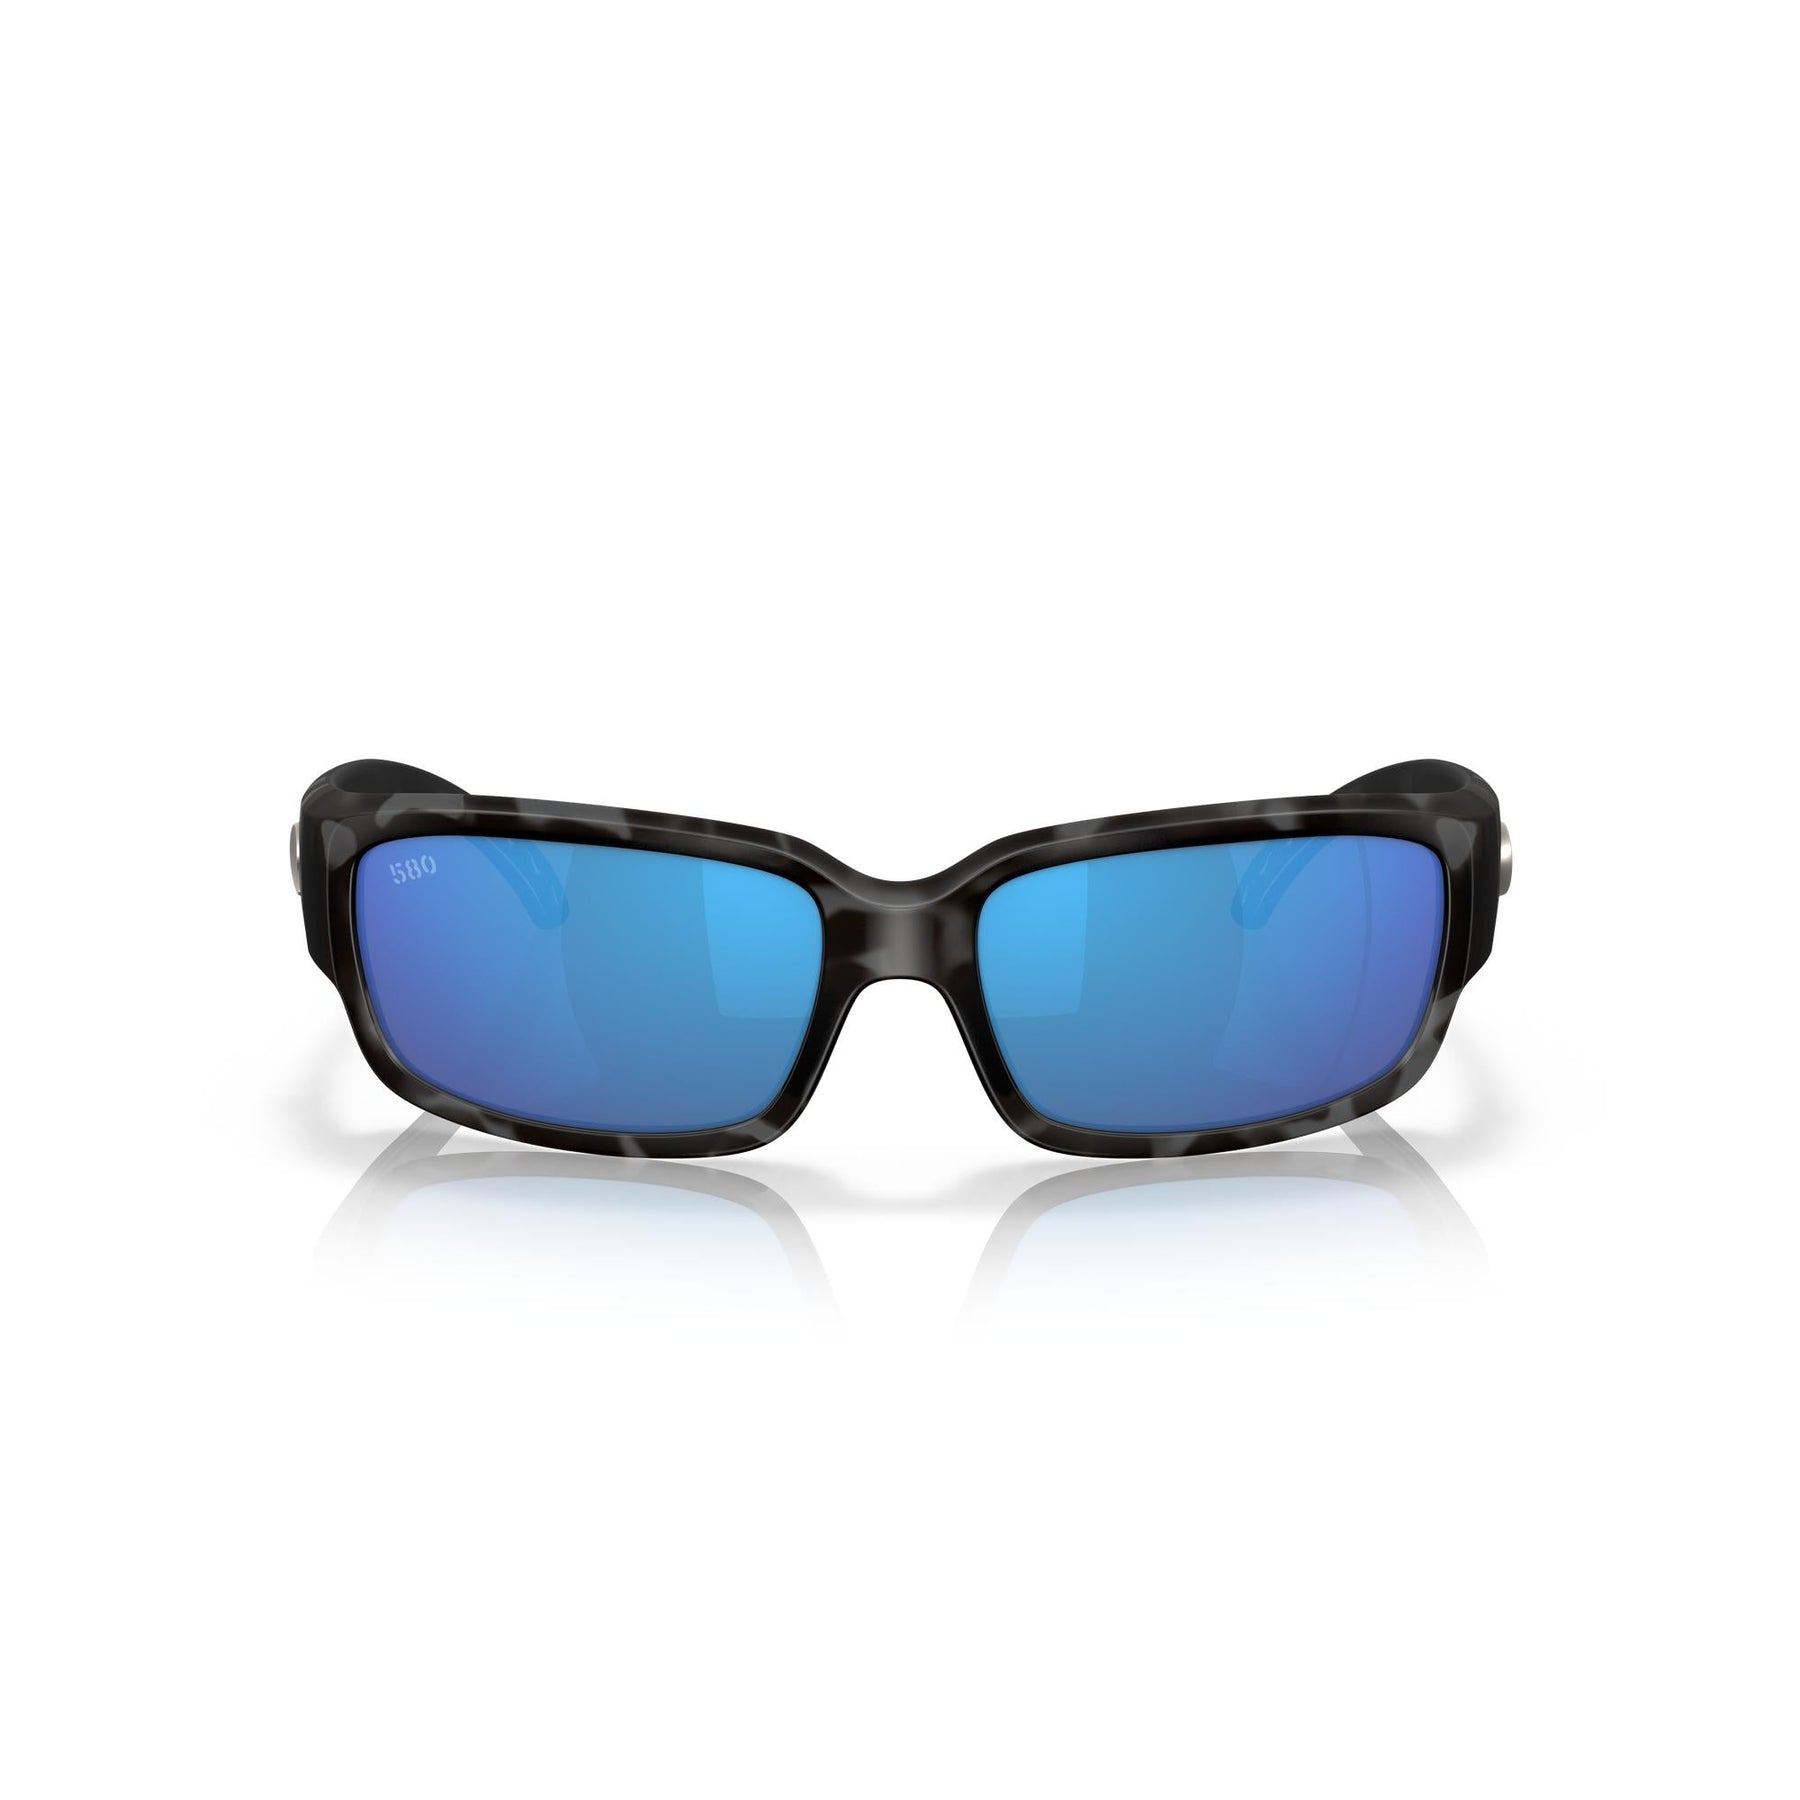 View of Sunglasses Costa Caballito Tiger Shark Blue Mirror 580G available at EZOKO Pike and Musky Shop